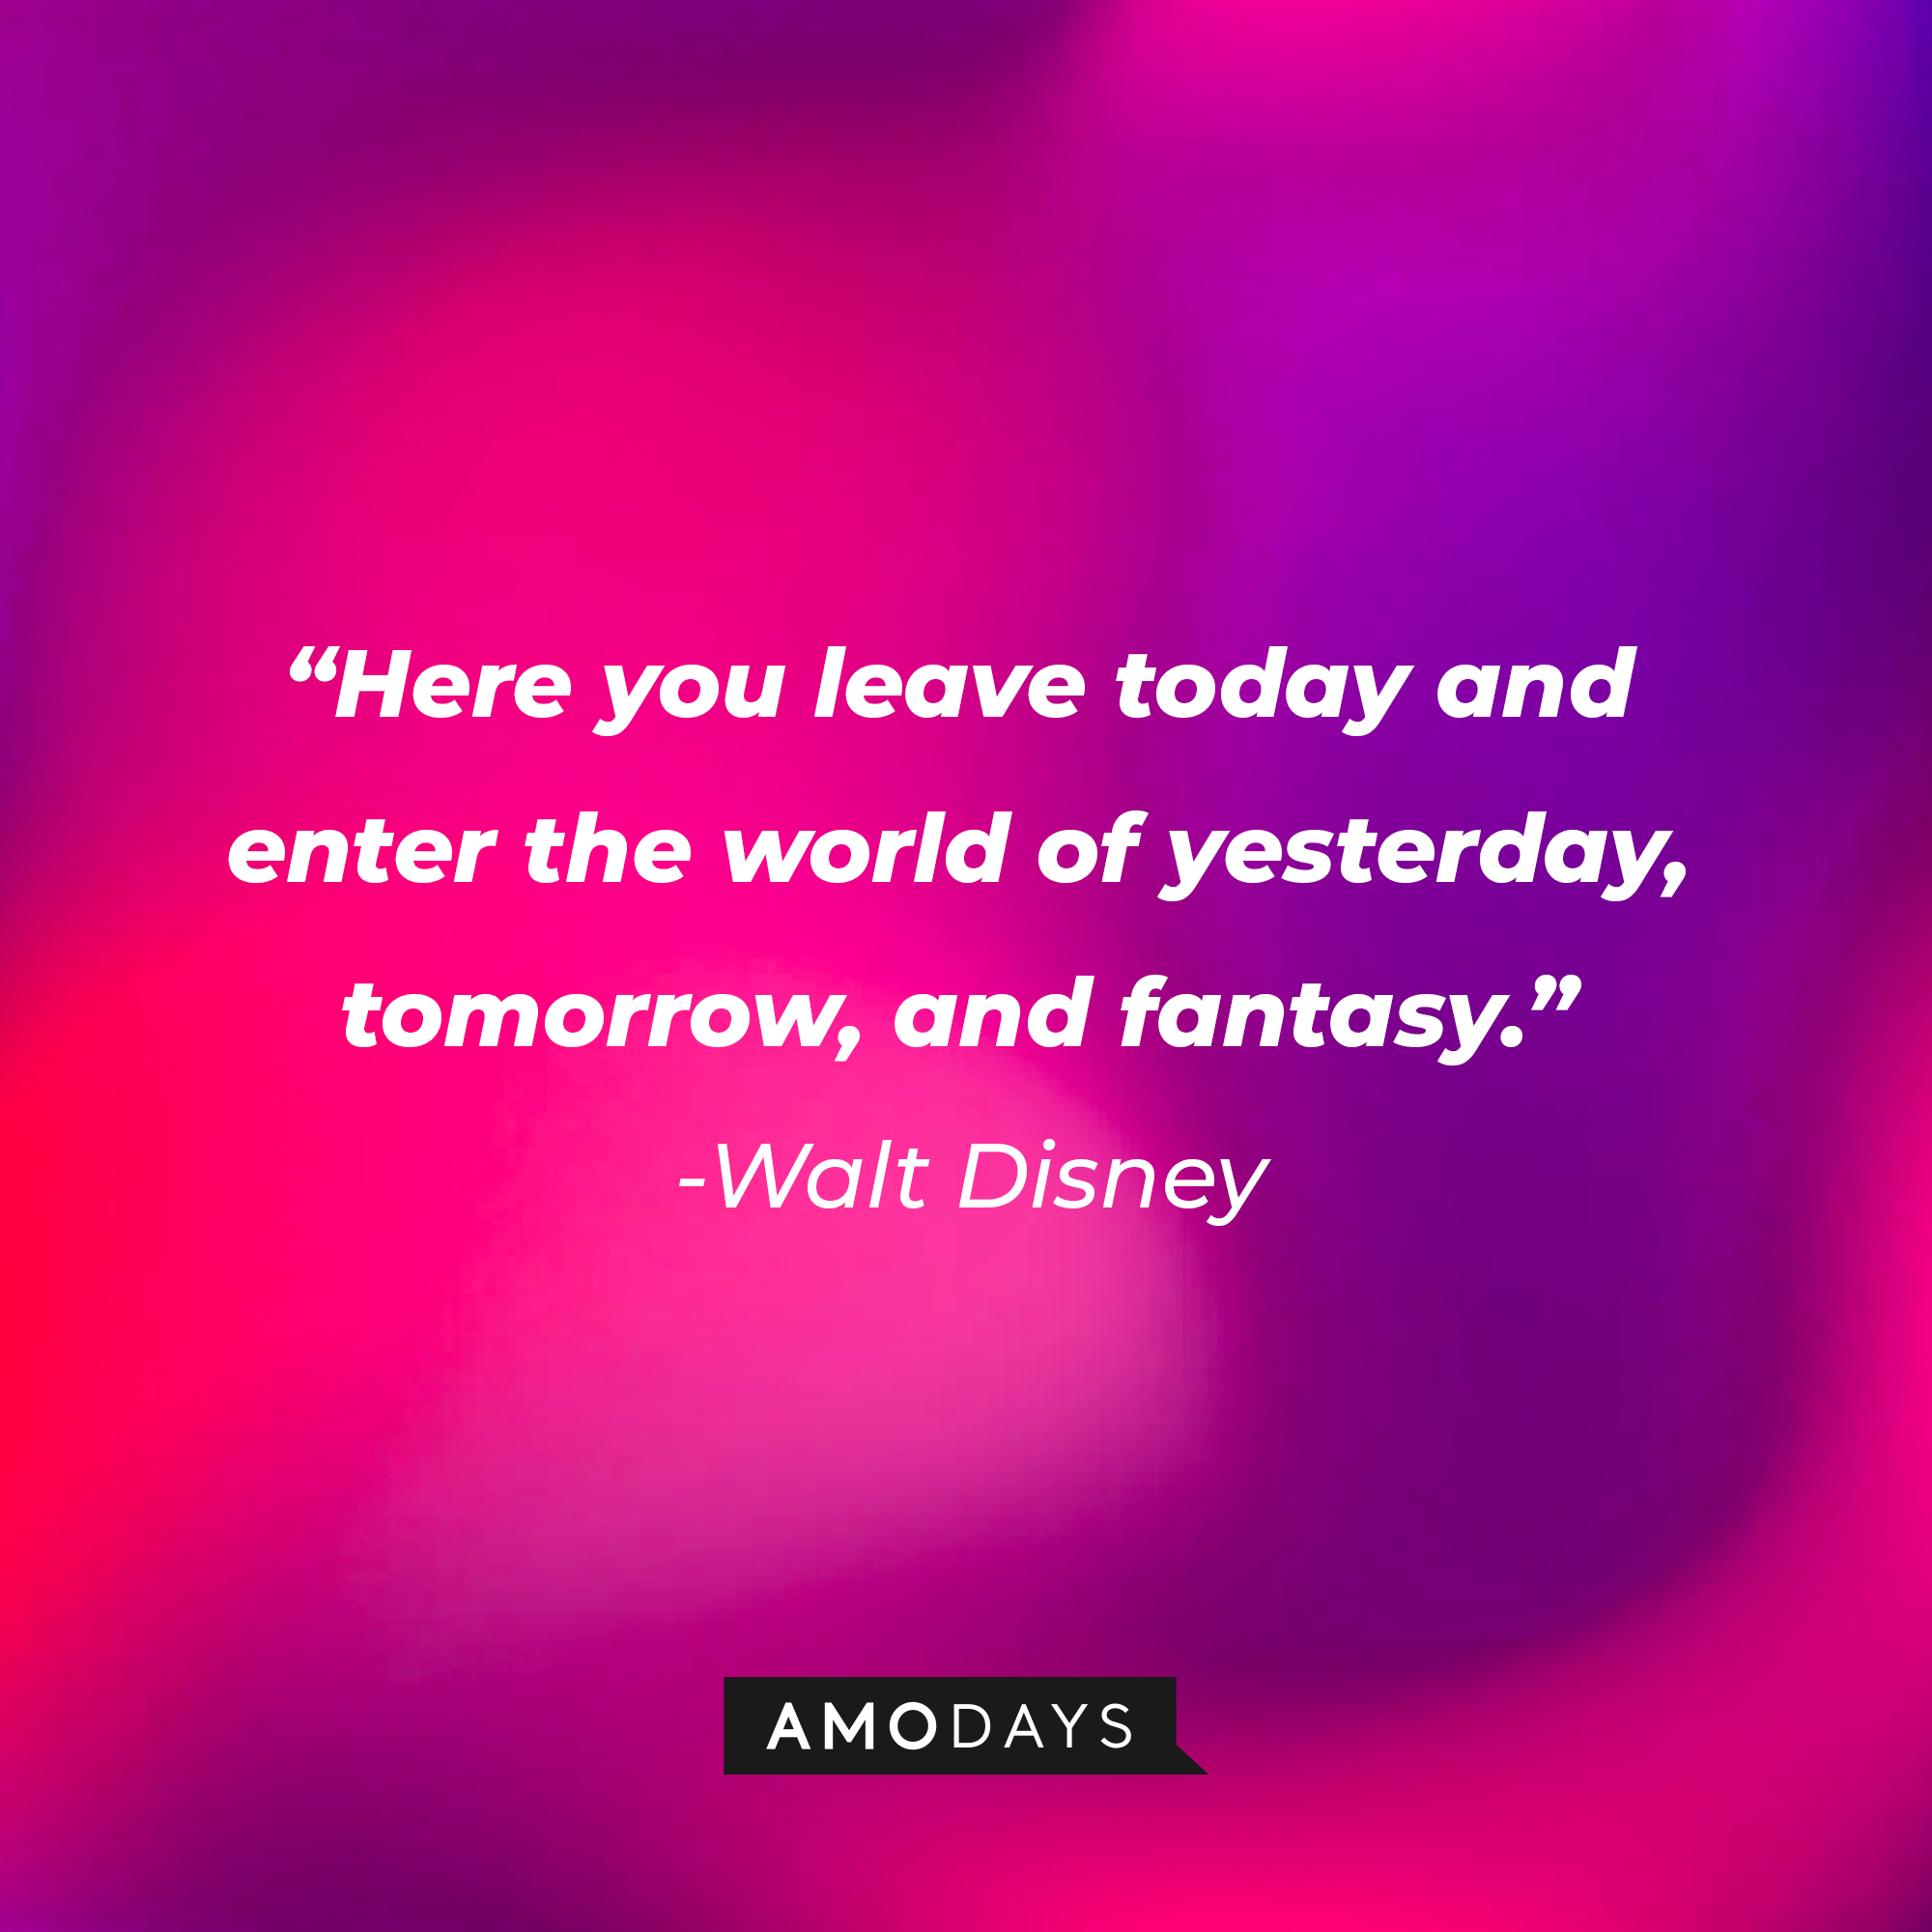 Walt Disney’s quote: "Here you leave today and enter the world of yesterday, tomorrow, and fantasy." | Image: Amodays